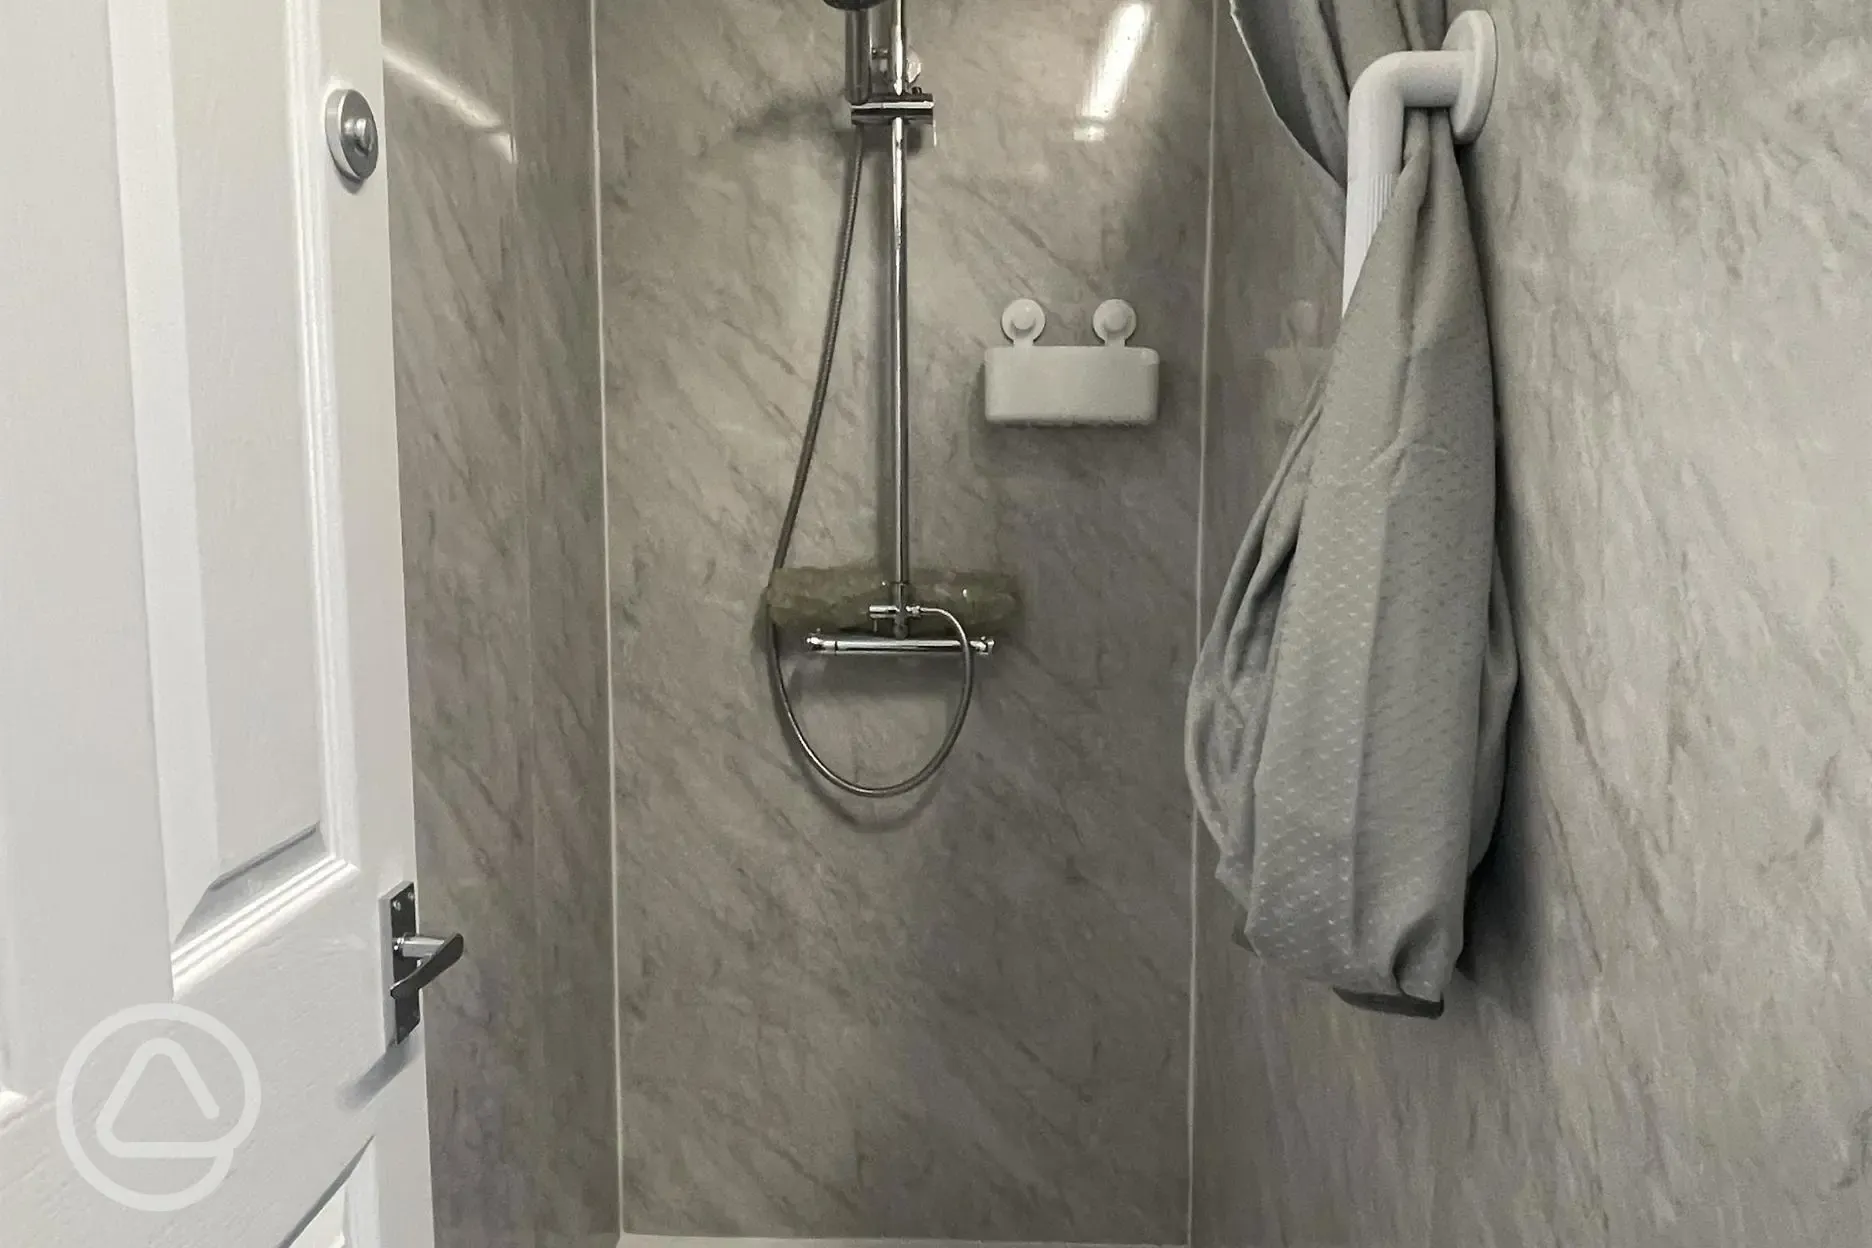 Our showers with rain head and normal head